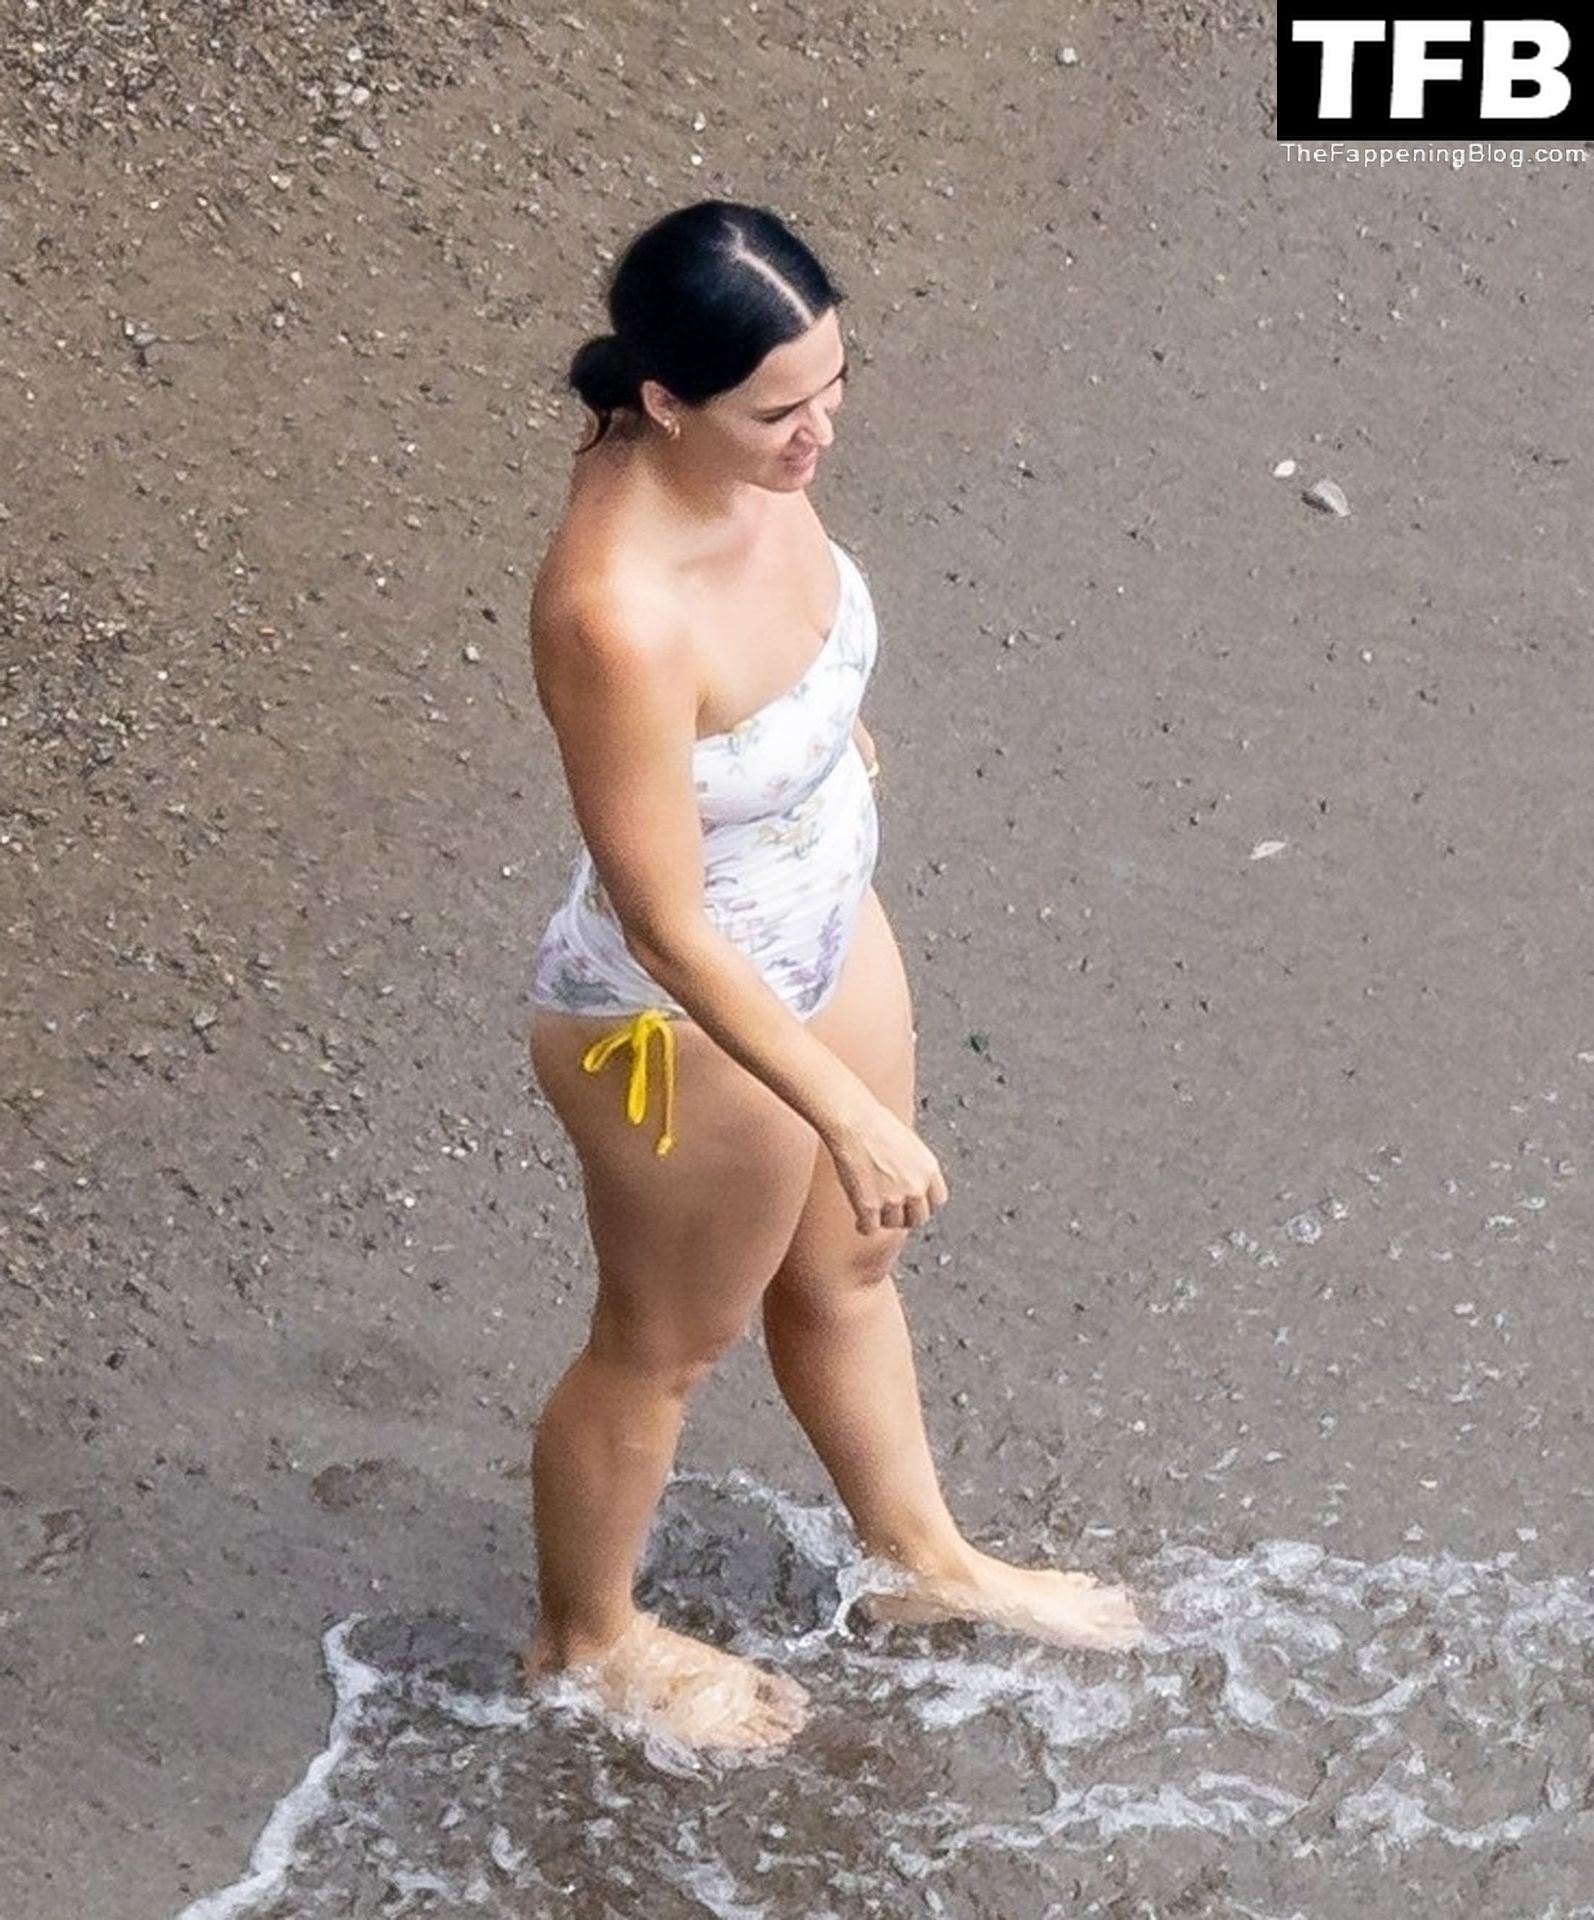 Katy Perry Sexy The Fappening Blog 33 - Katy Perry Rocks a Strapless Swimsuit While Enjoying a Beach Day with Orlando Bloom in Positano (105 Photos)